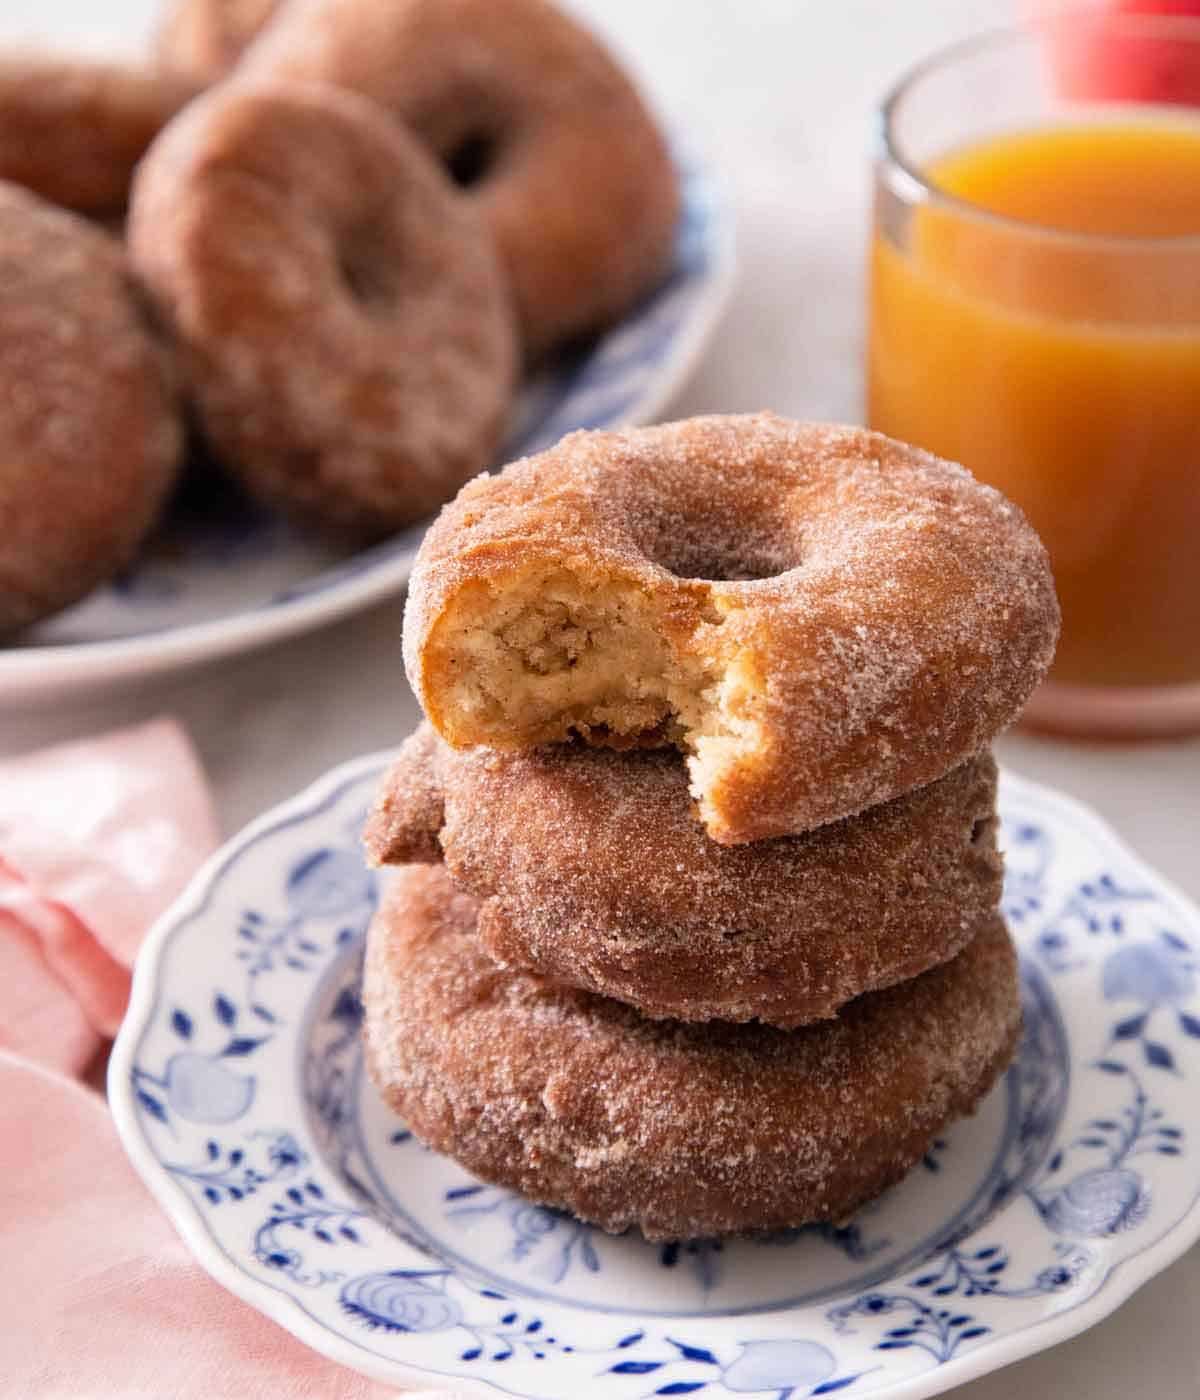 A stack of three apple cider donuts with the top one with a bite taken out of it.